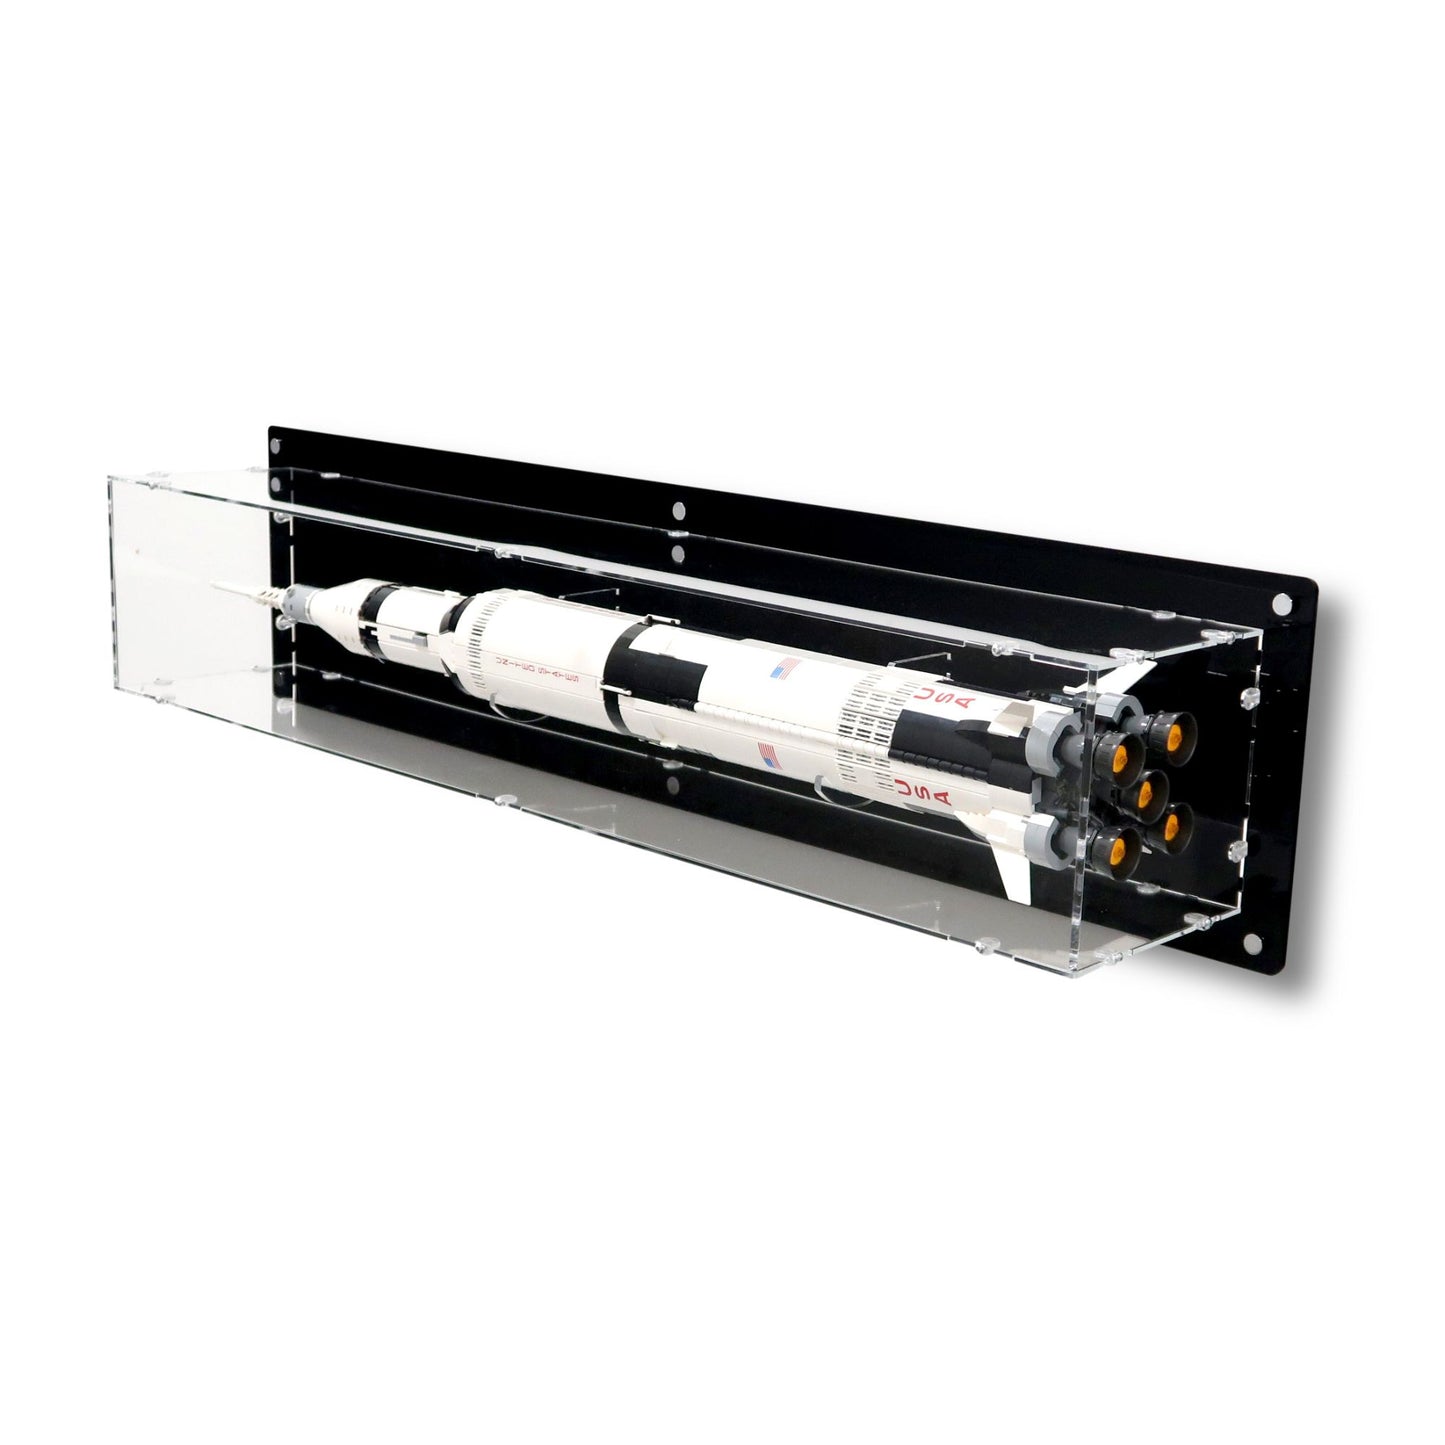 3 in 1 Wall-Mounted Case for 92176/21309 NASA Saturn V